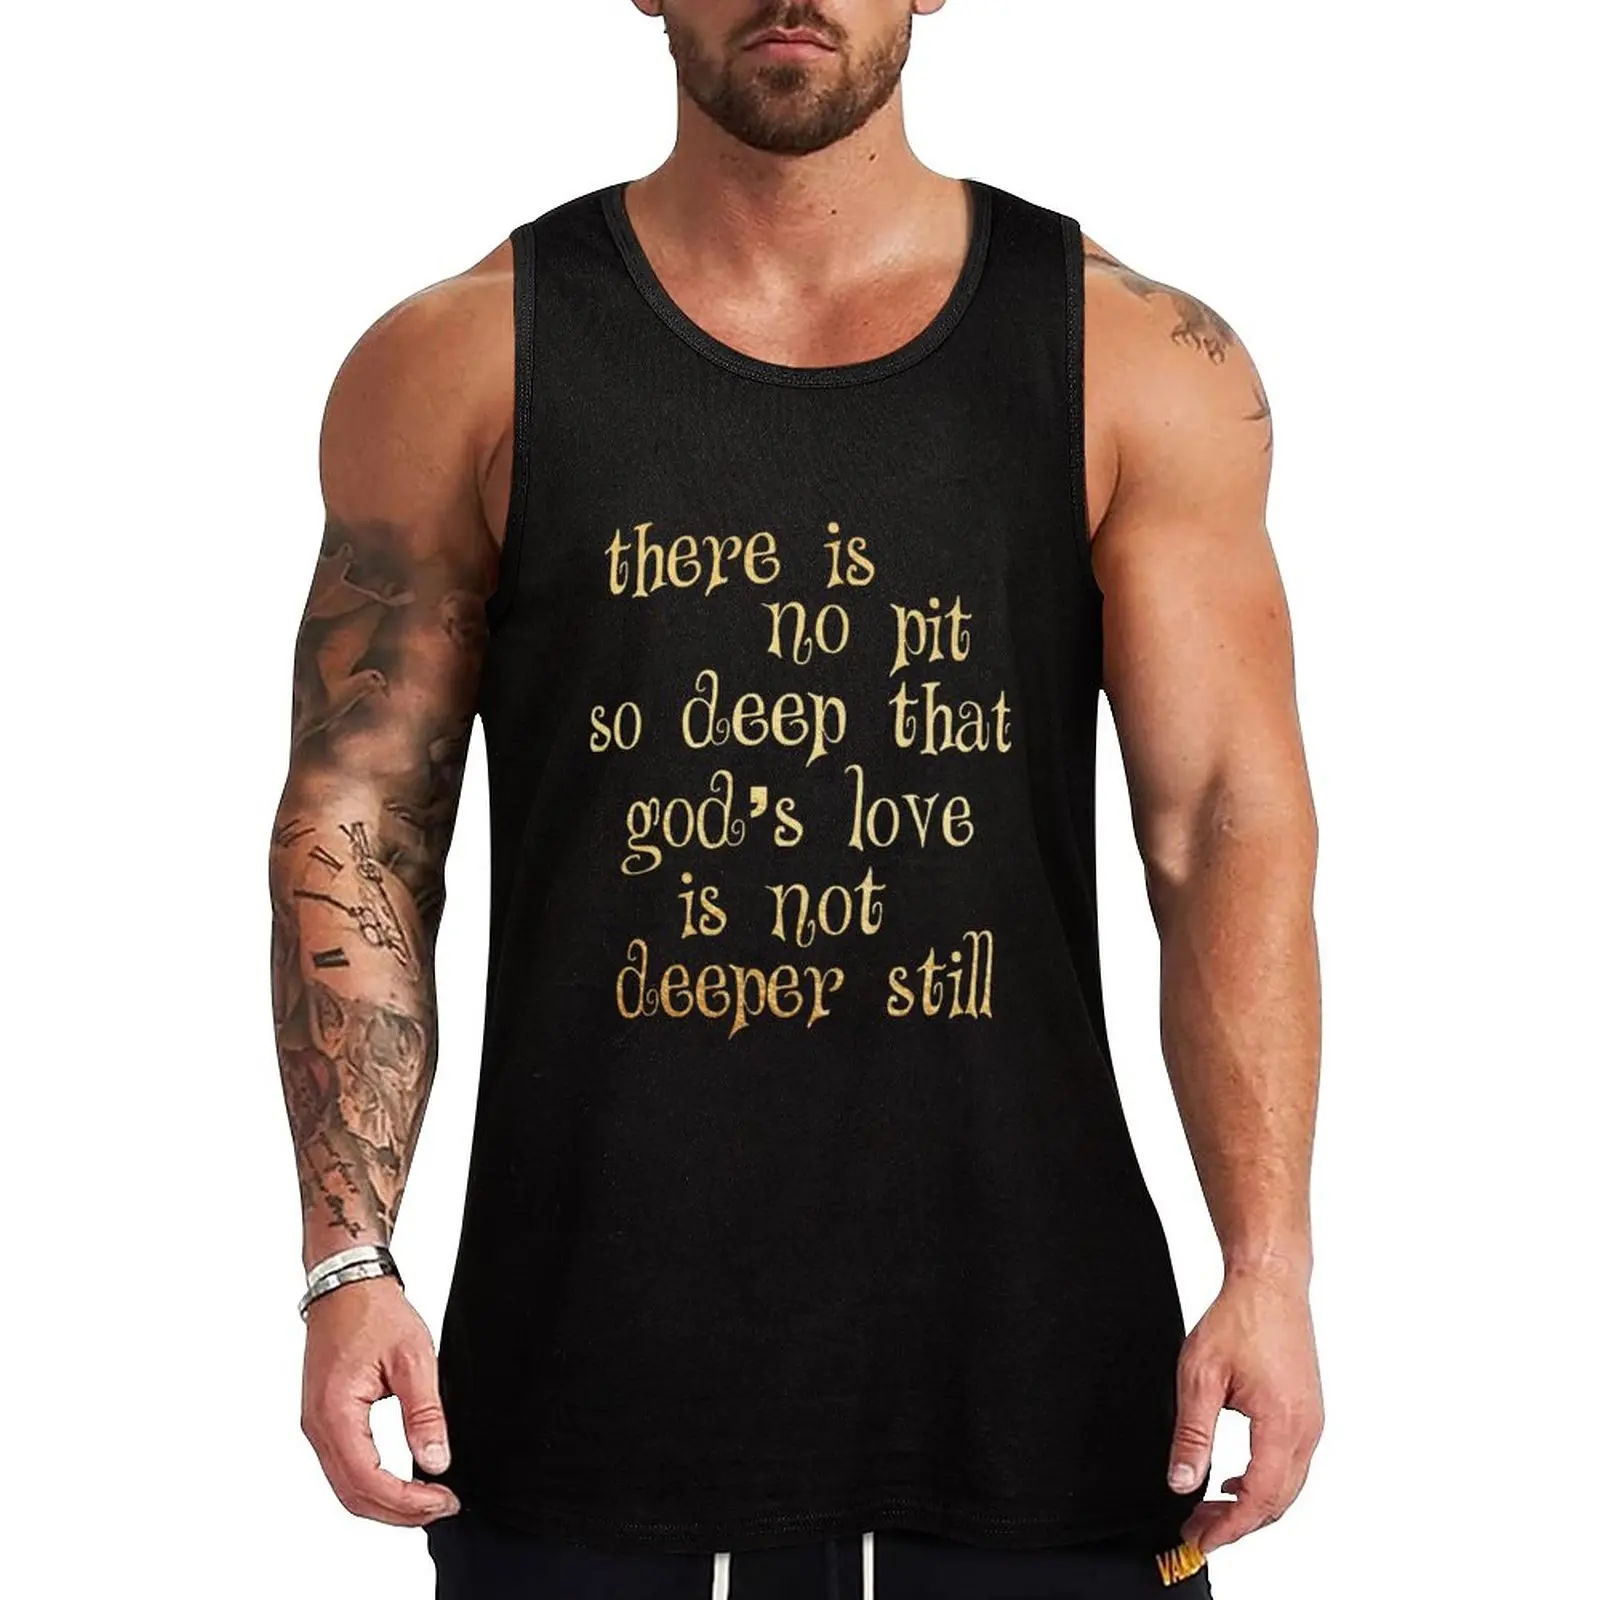 

New There is no pit so deep that Tank Top sleeveless shirt man basketball clothing